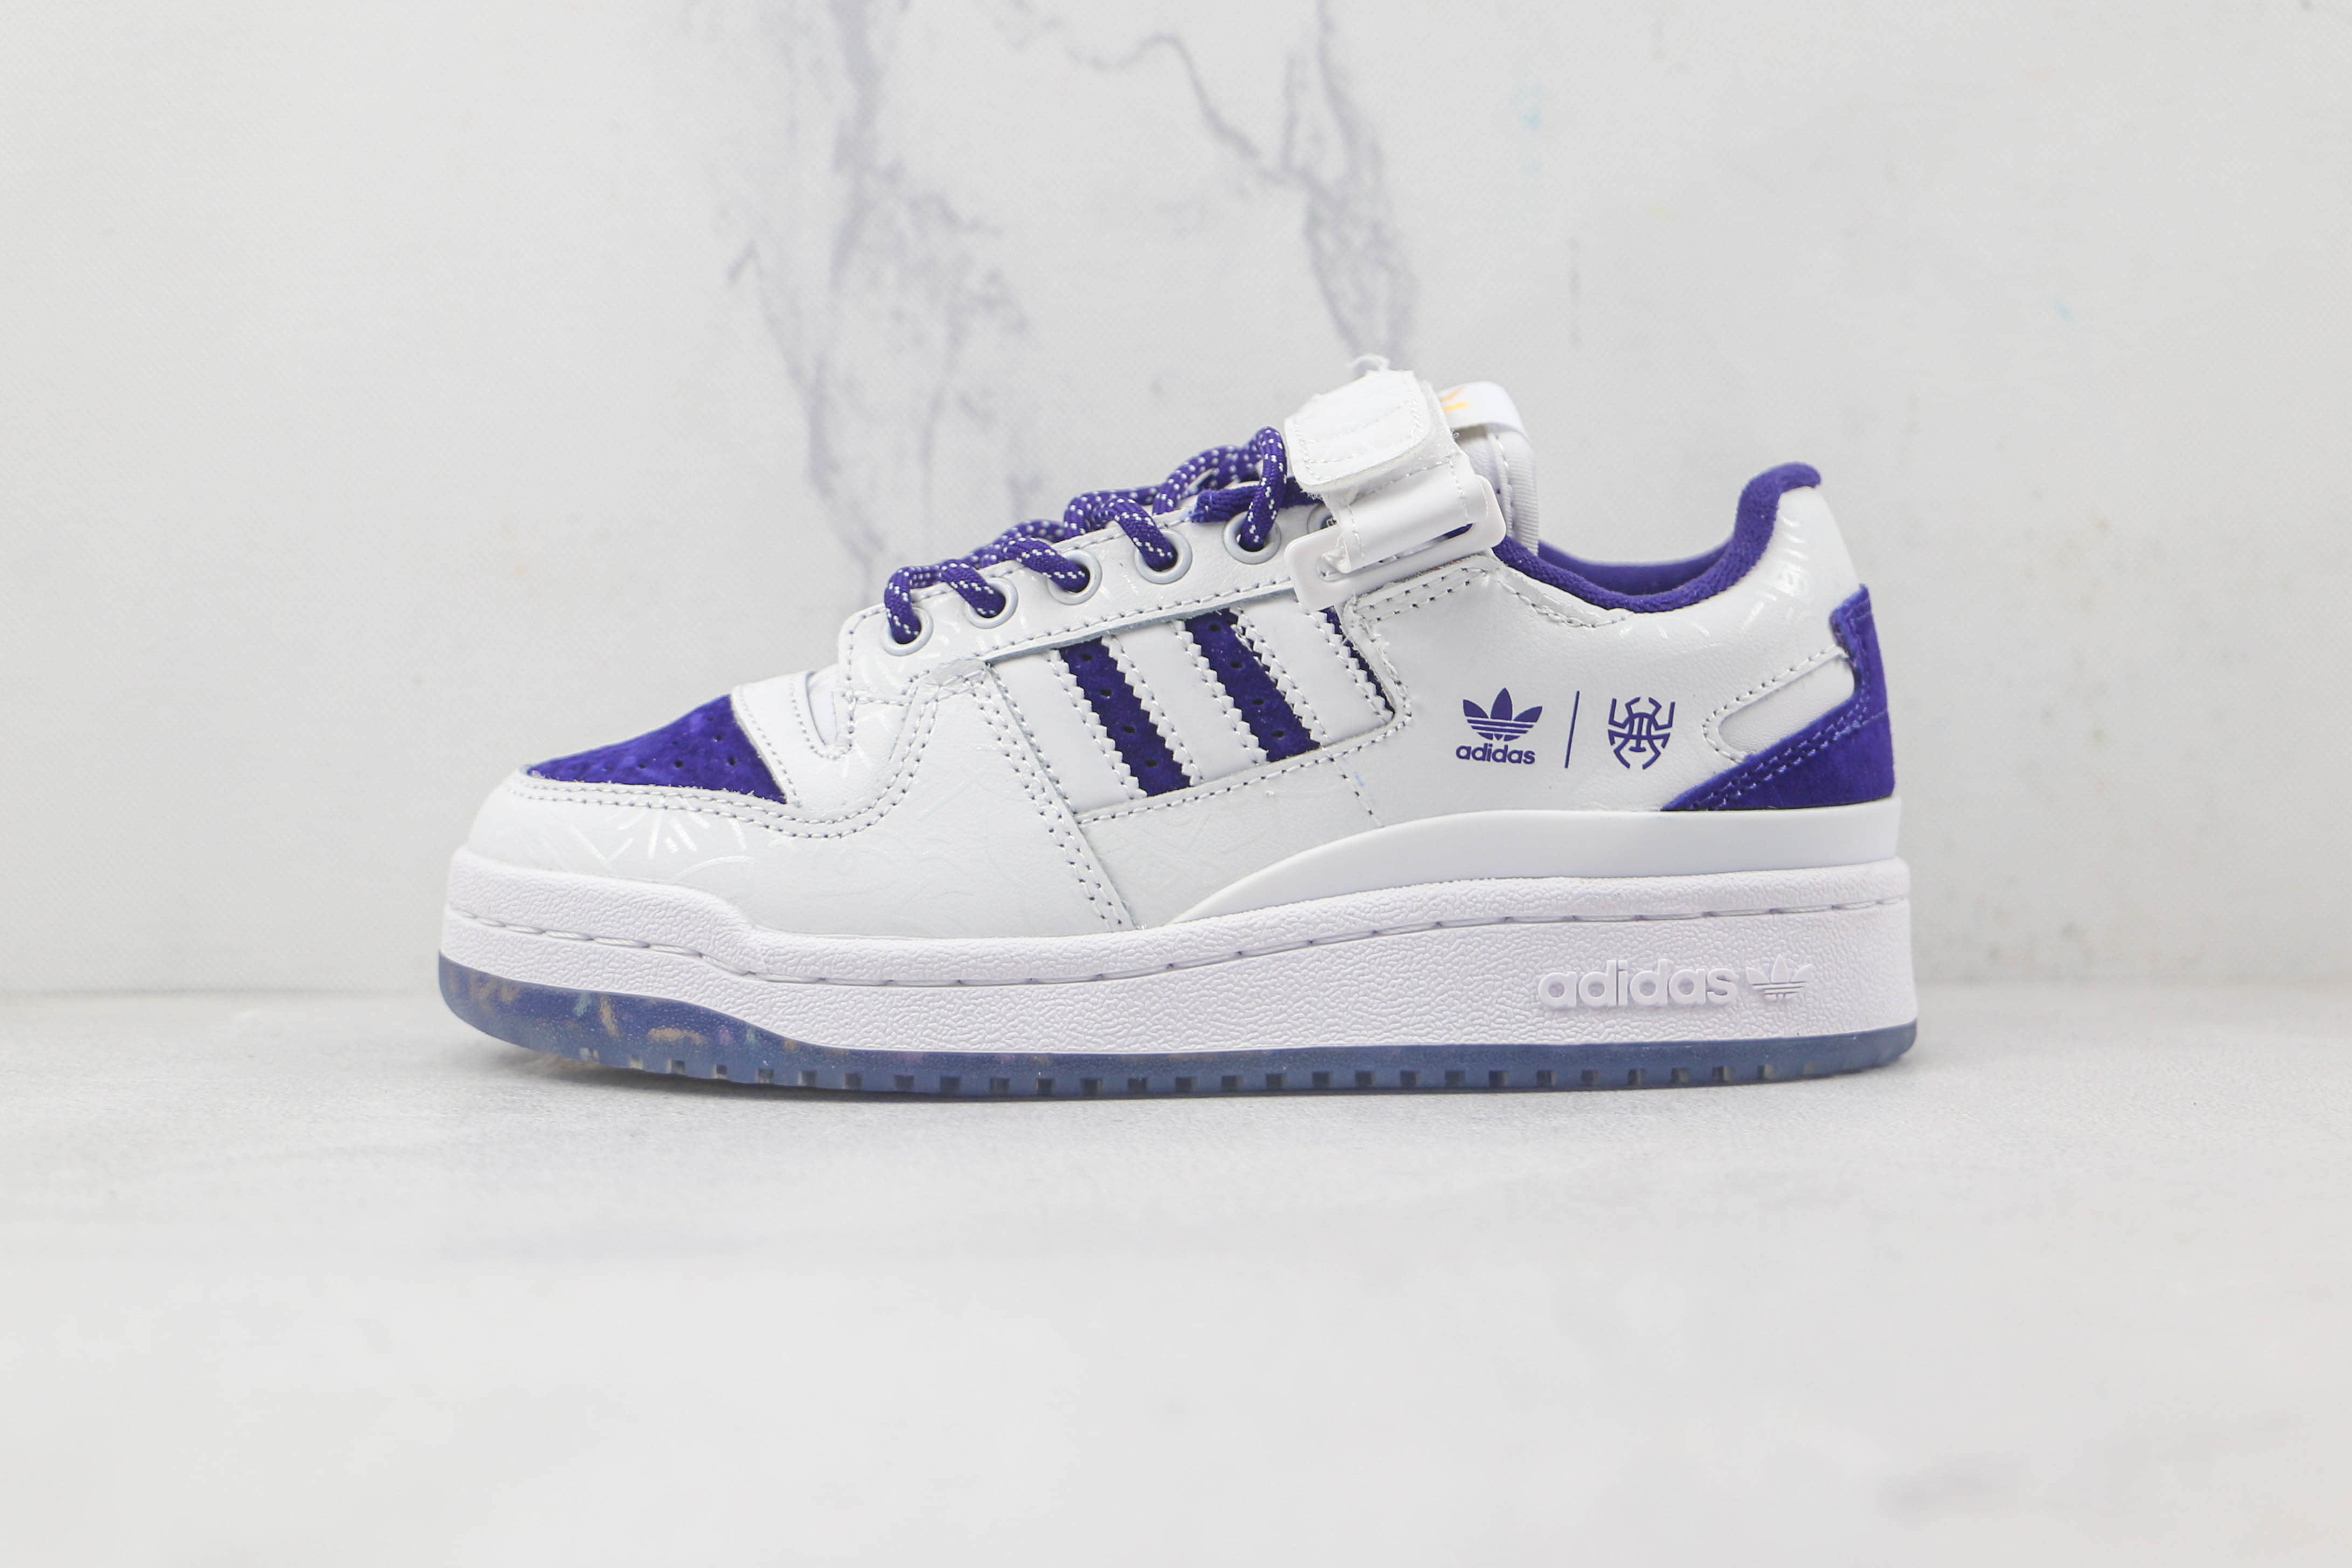 Adidas Donovan Mitchell x Forum Low 'Collegiate Purple' GY8287 - Stylish Sneakers for Basketball Fans